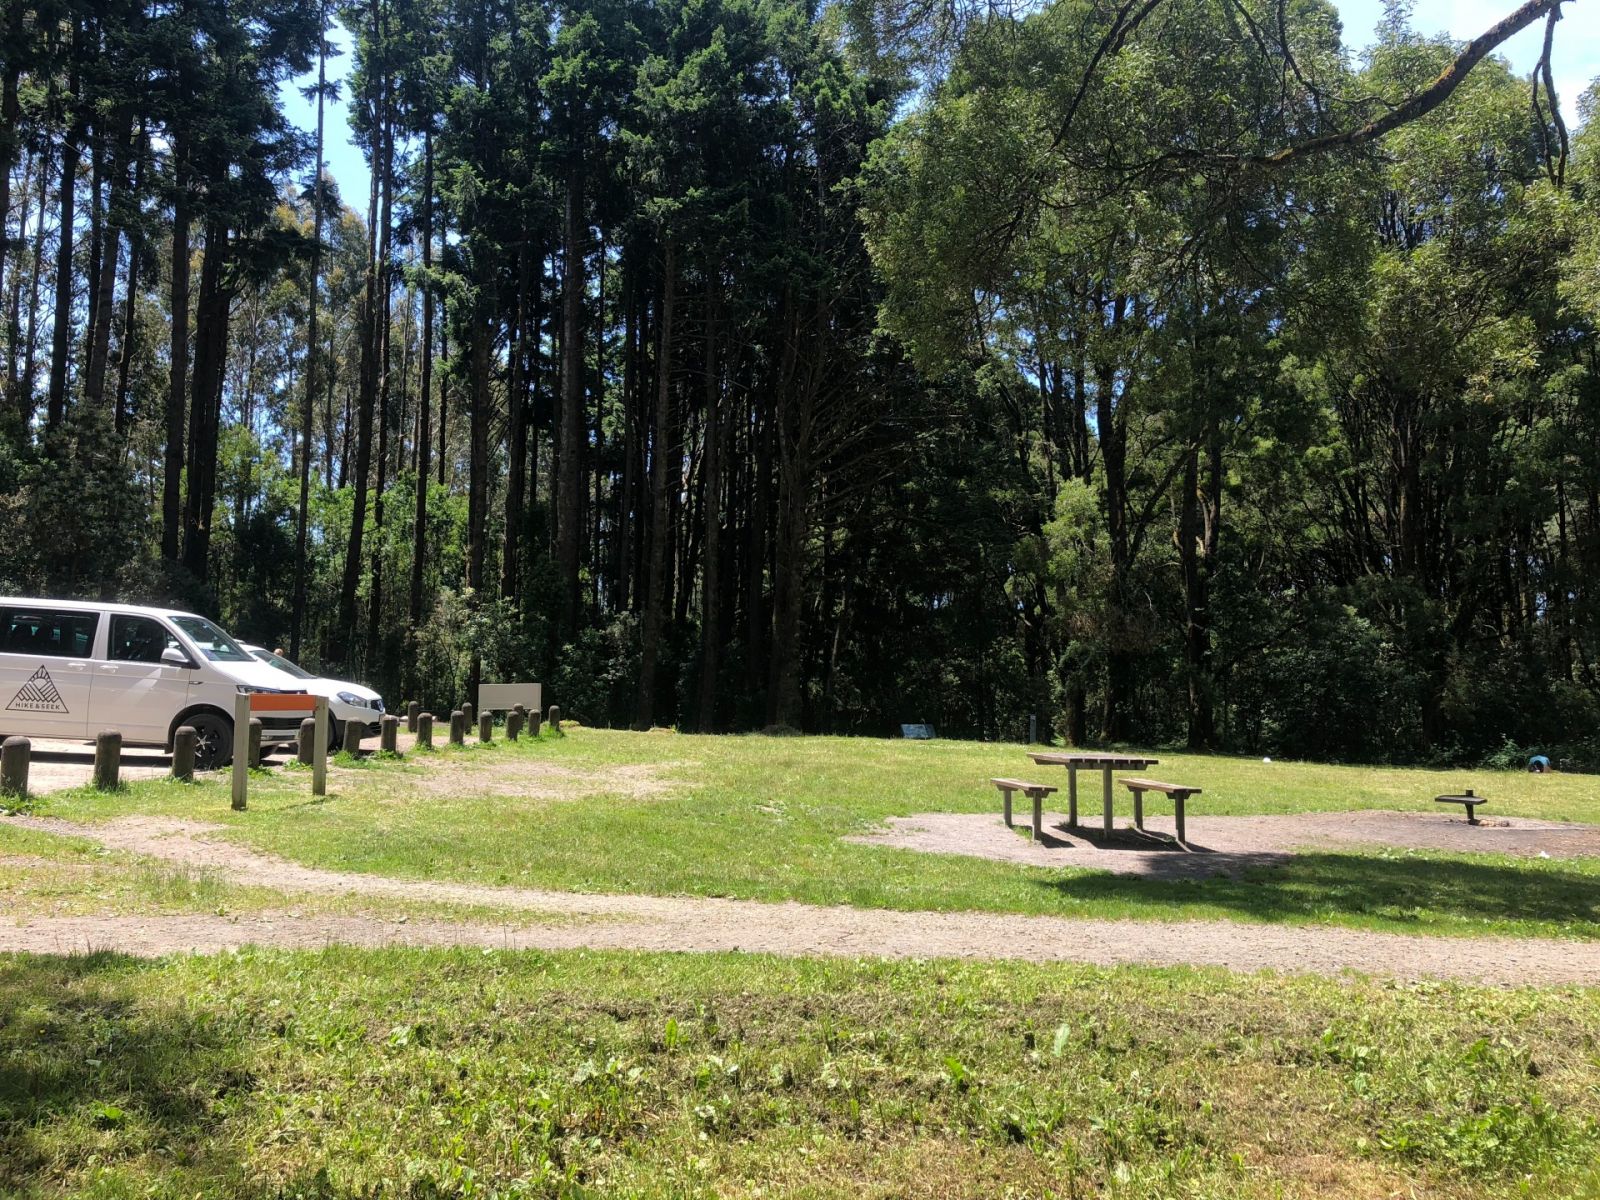 Two vehicles parked next to a grassy campground with a picnic table and fire pit